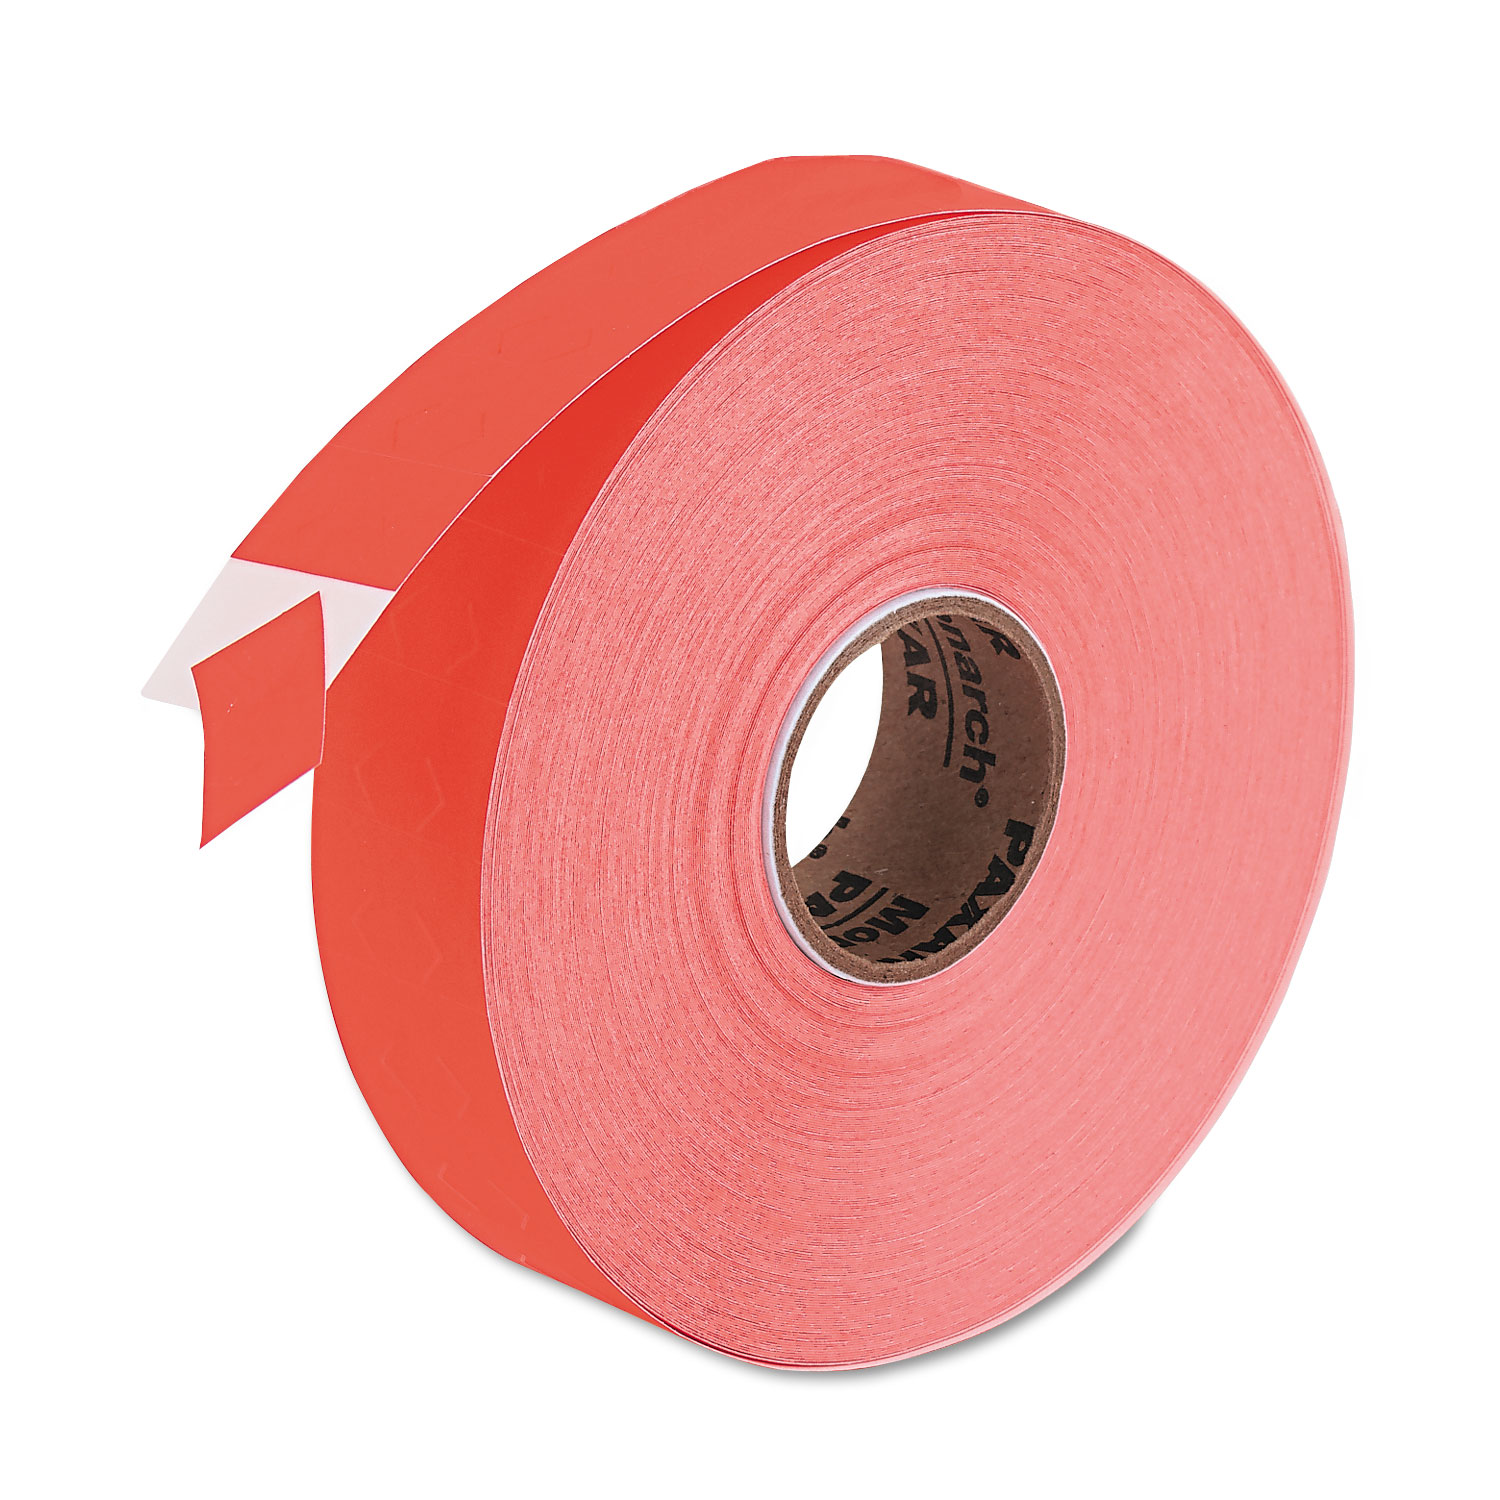  Monarch 925075 Easy-Load One-Line Labels for Pricemarker 1131, 0.44 x 0.88, Fluorescent Red, 2,500/Roll (MNK925075) 